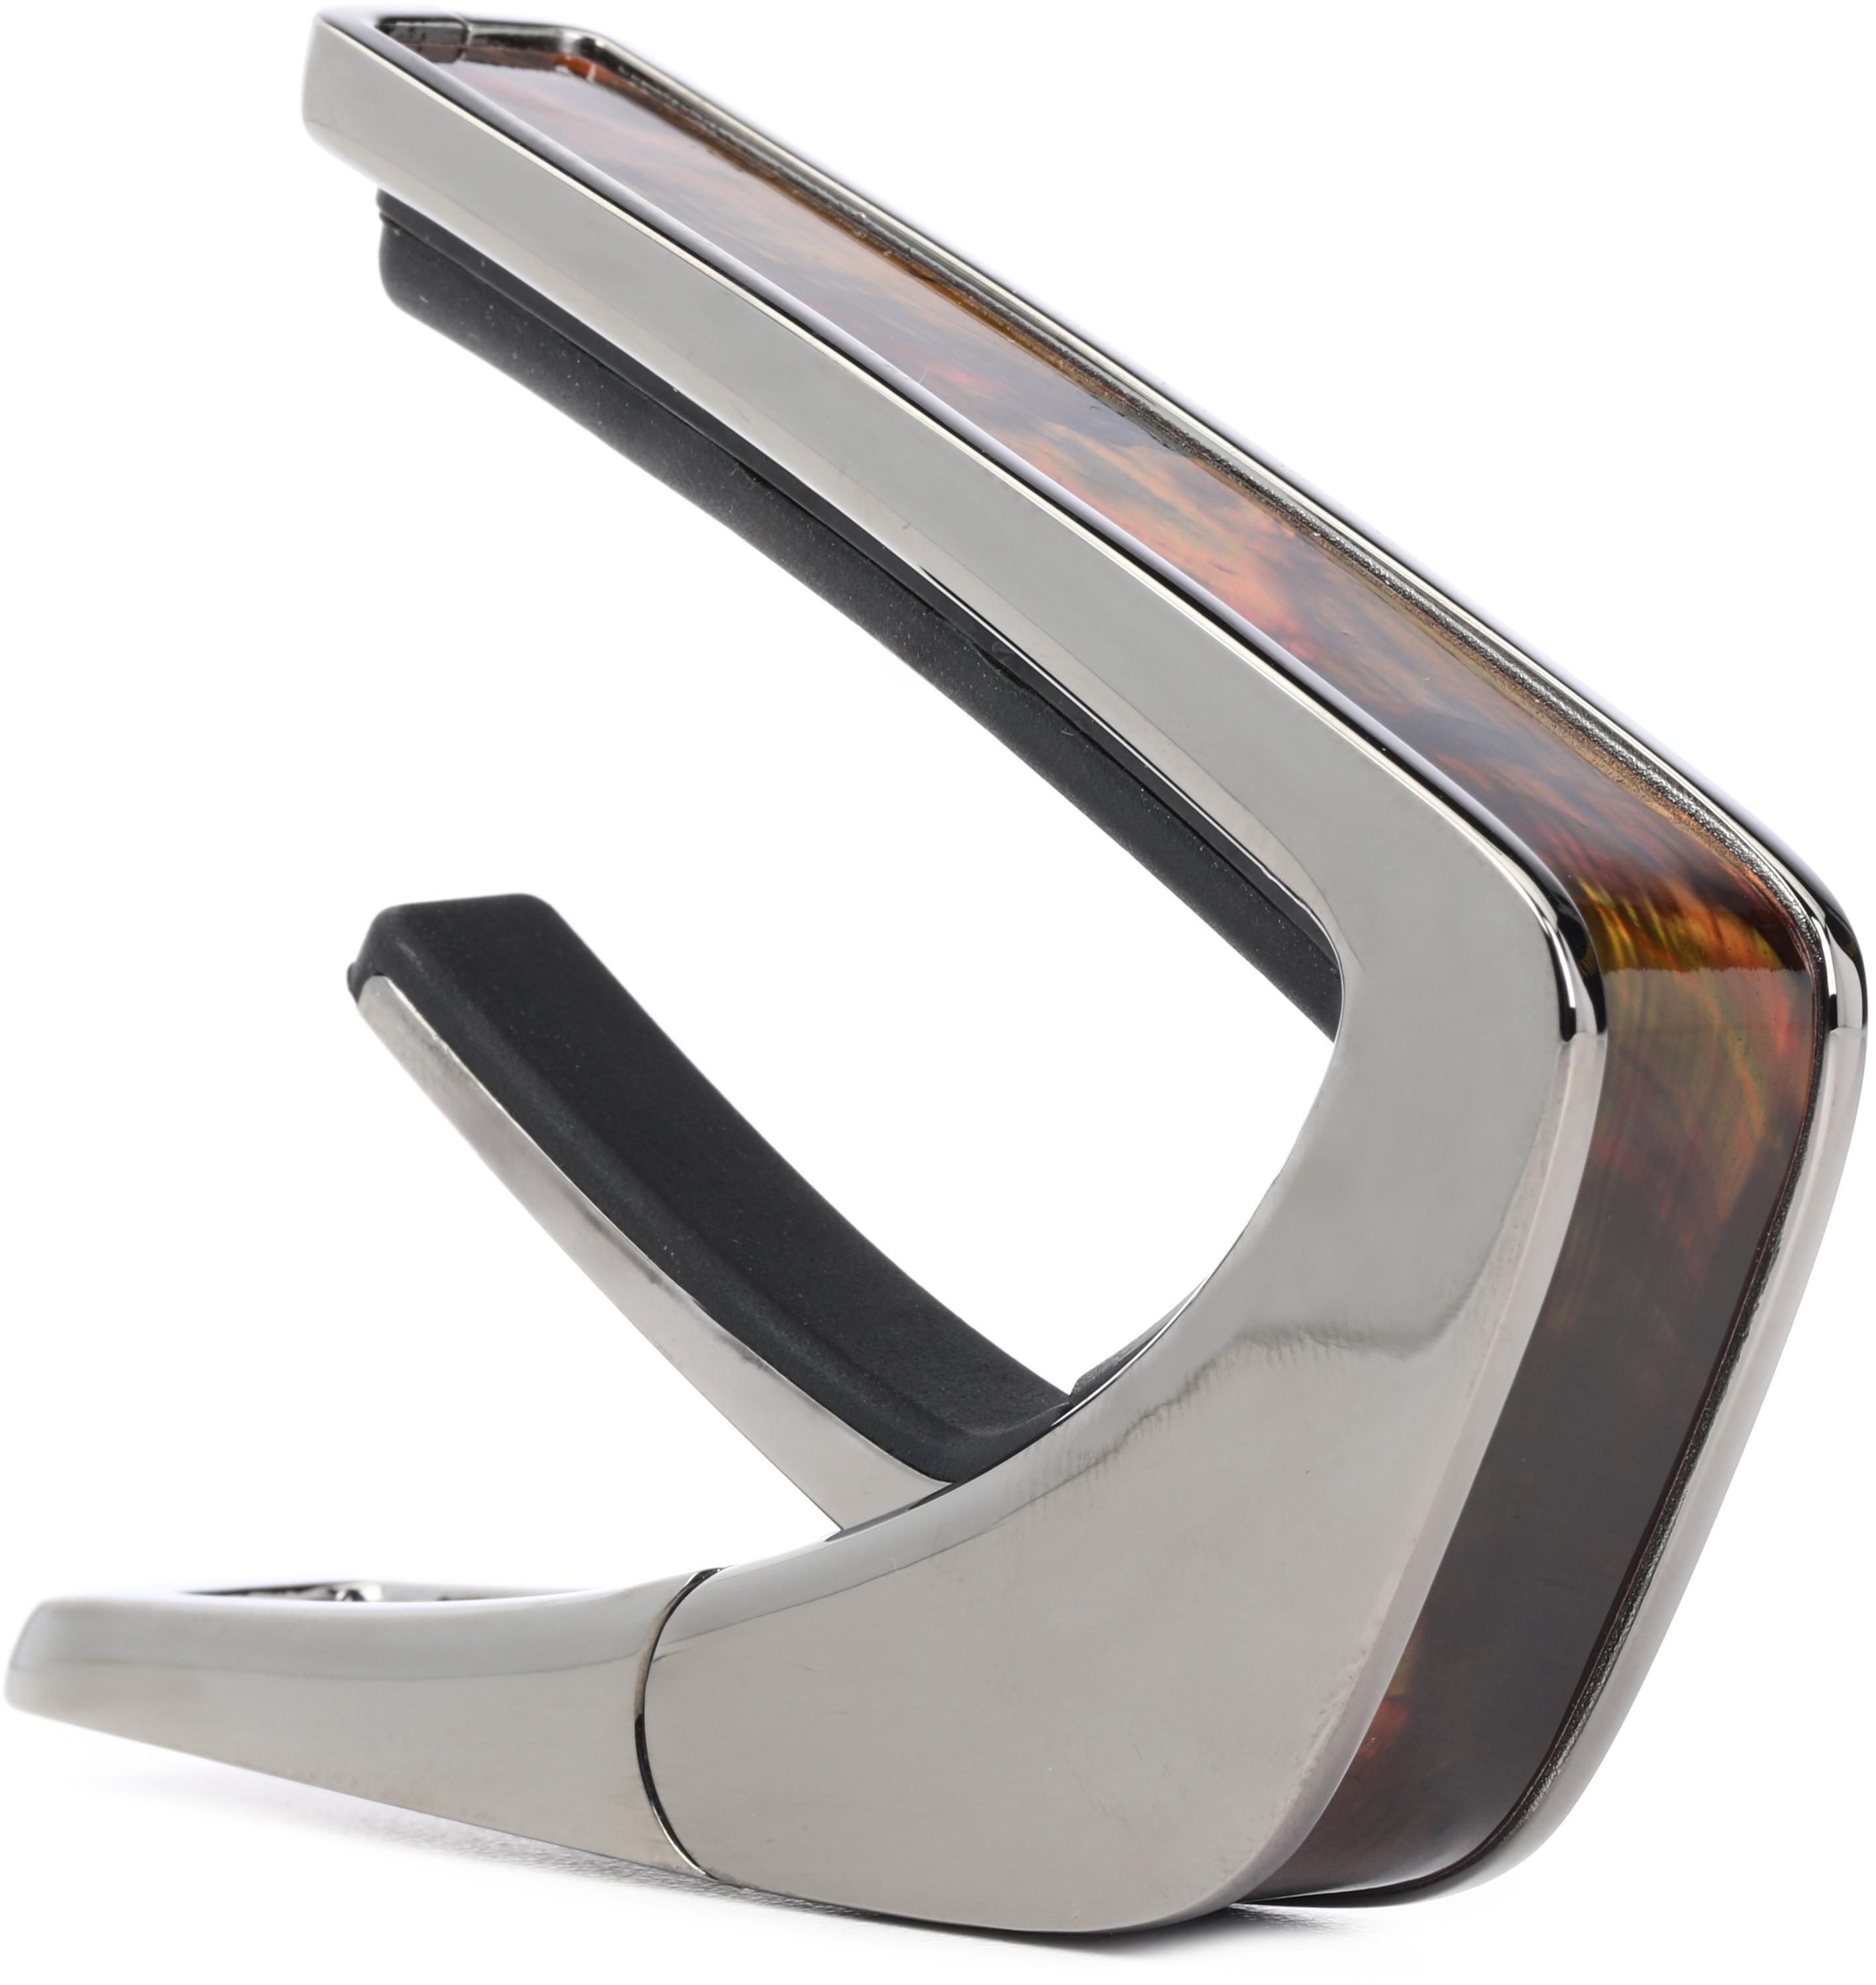 Thalia Shell Collection Capo - Black Chrome with Tennessee Whiskey Wing